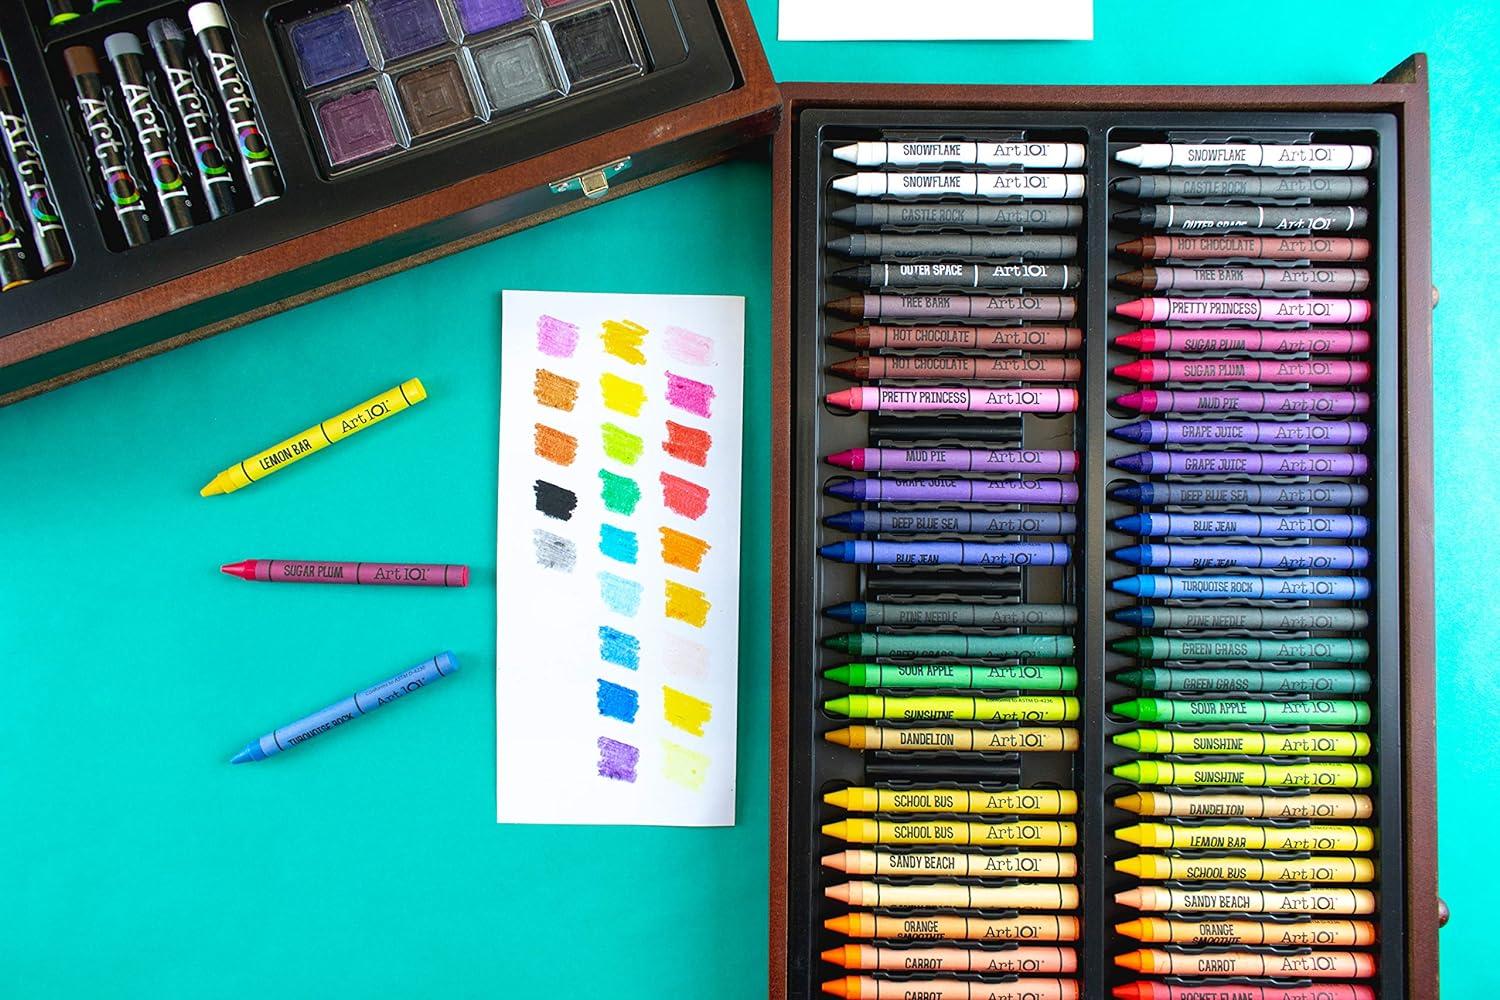 Oil Pastels 101: A Comprehensive Guide to Painting with Oil Pastels 